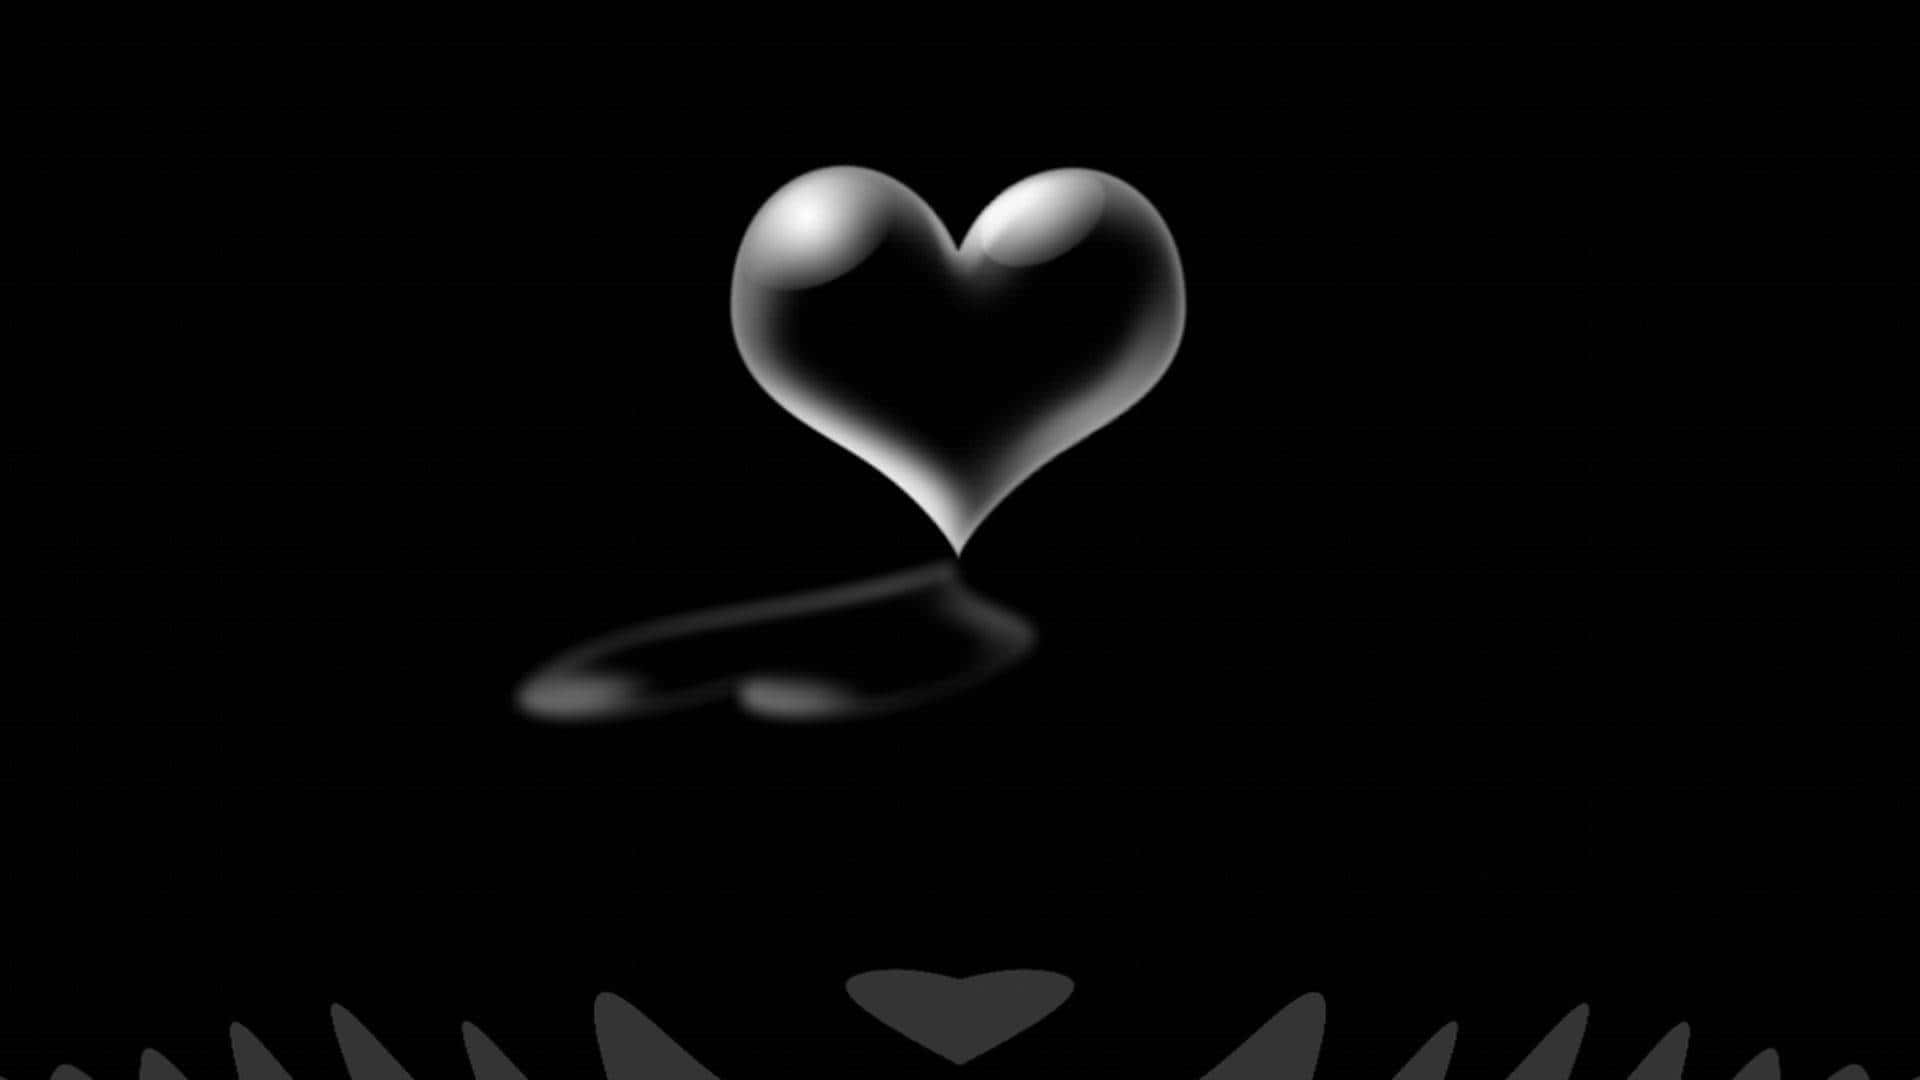 Loving Heart in Black and White